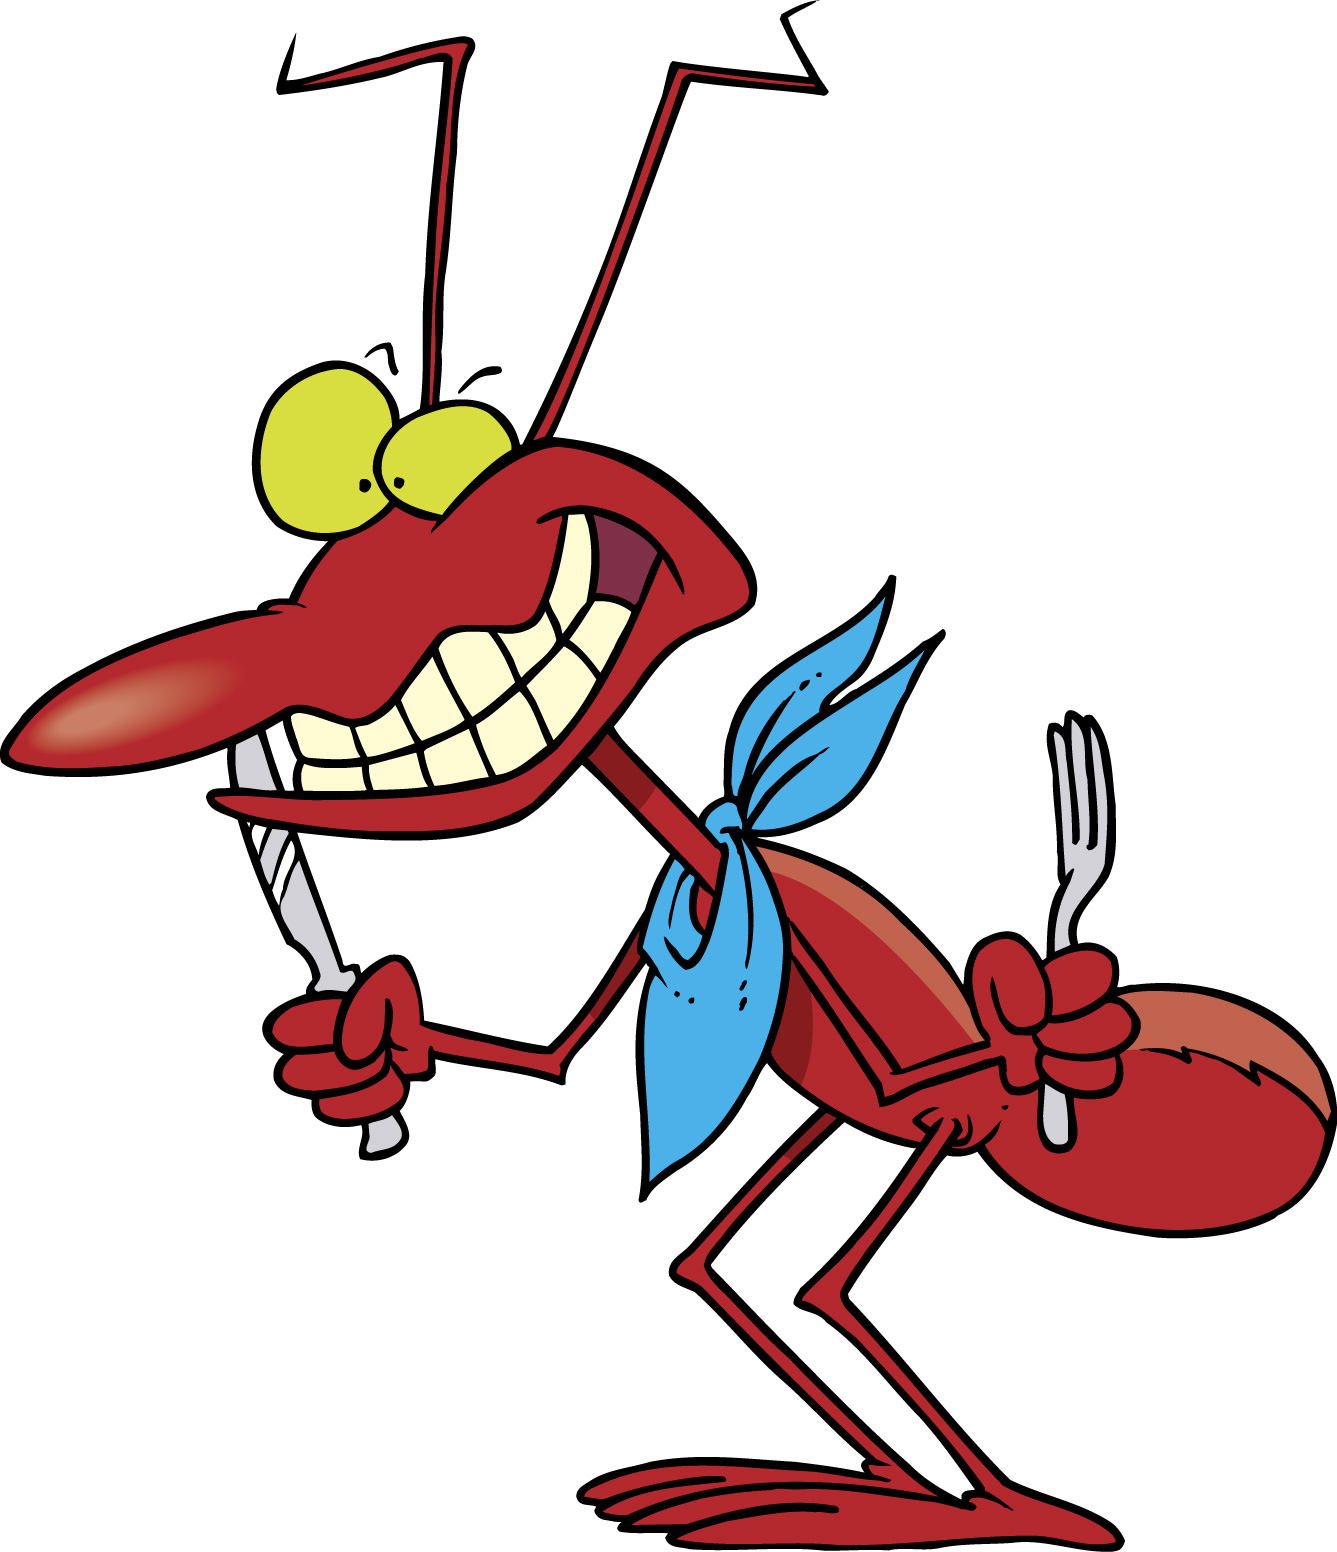 Funny ant pencil and. Ants clipart illustration